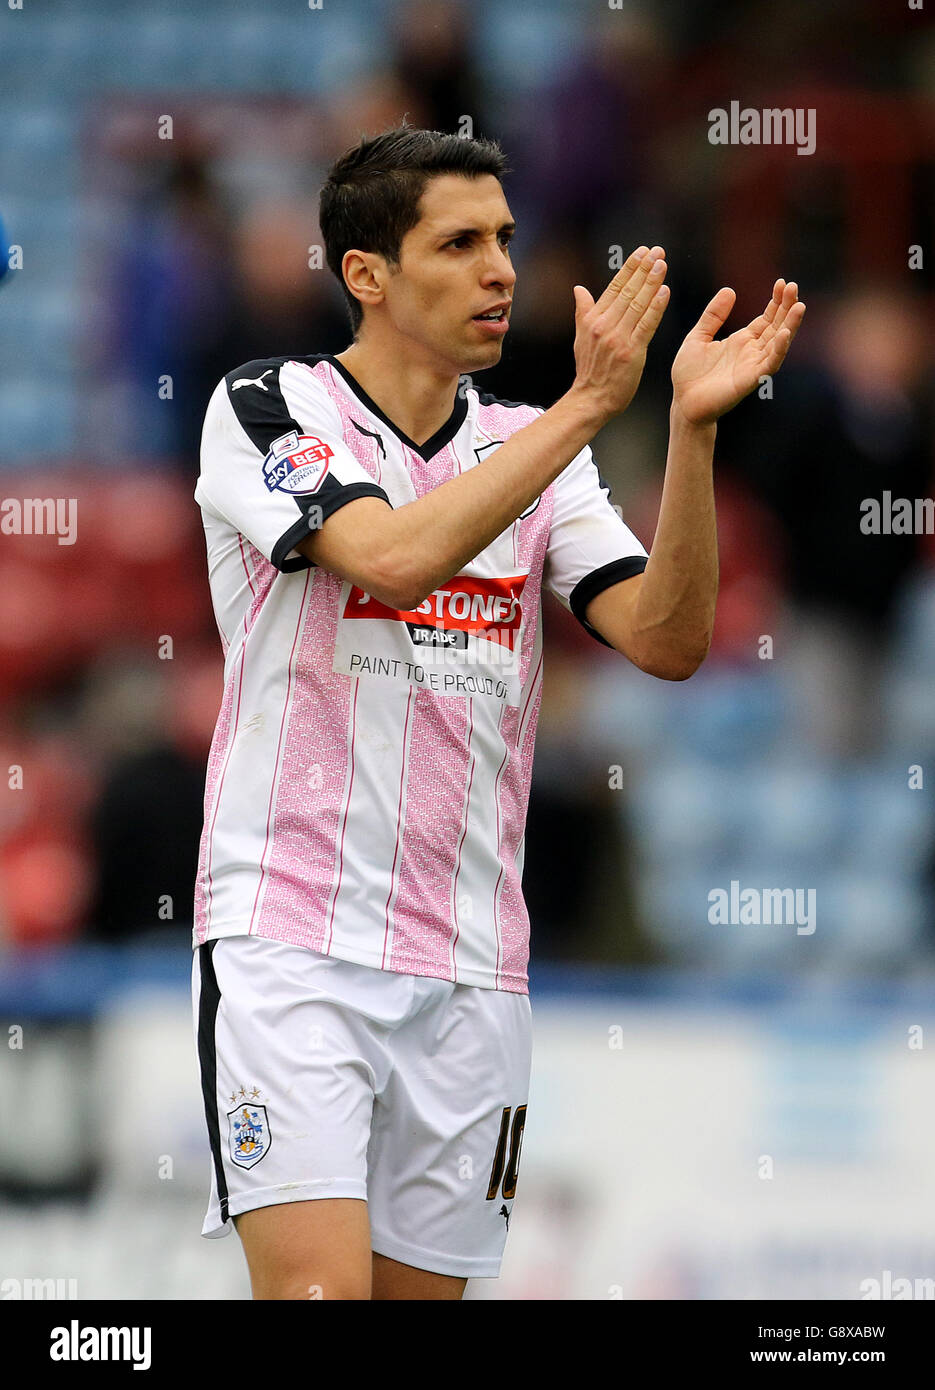 Huddersfield Town v Birmingham City - Sky Bet Championship - The John Smith's Stadium. Huddersfield Town's Karim Matmour acknowledges the fans after the final whistle Stock Photo